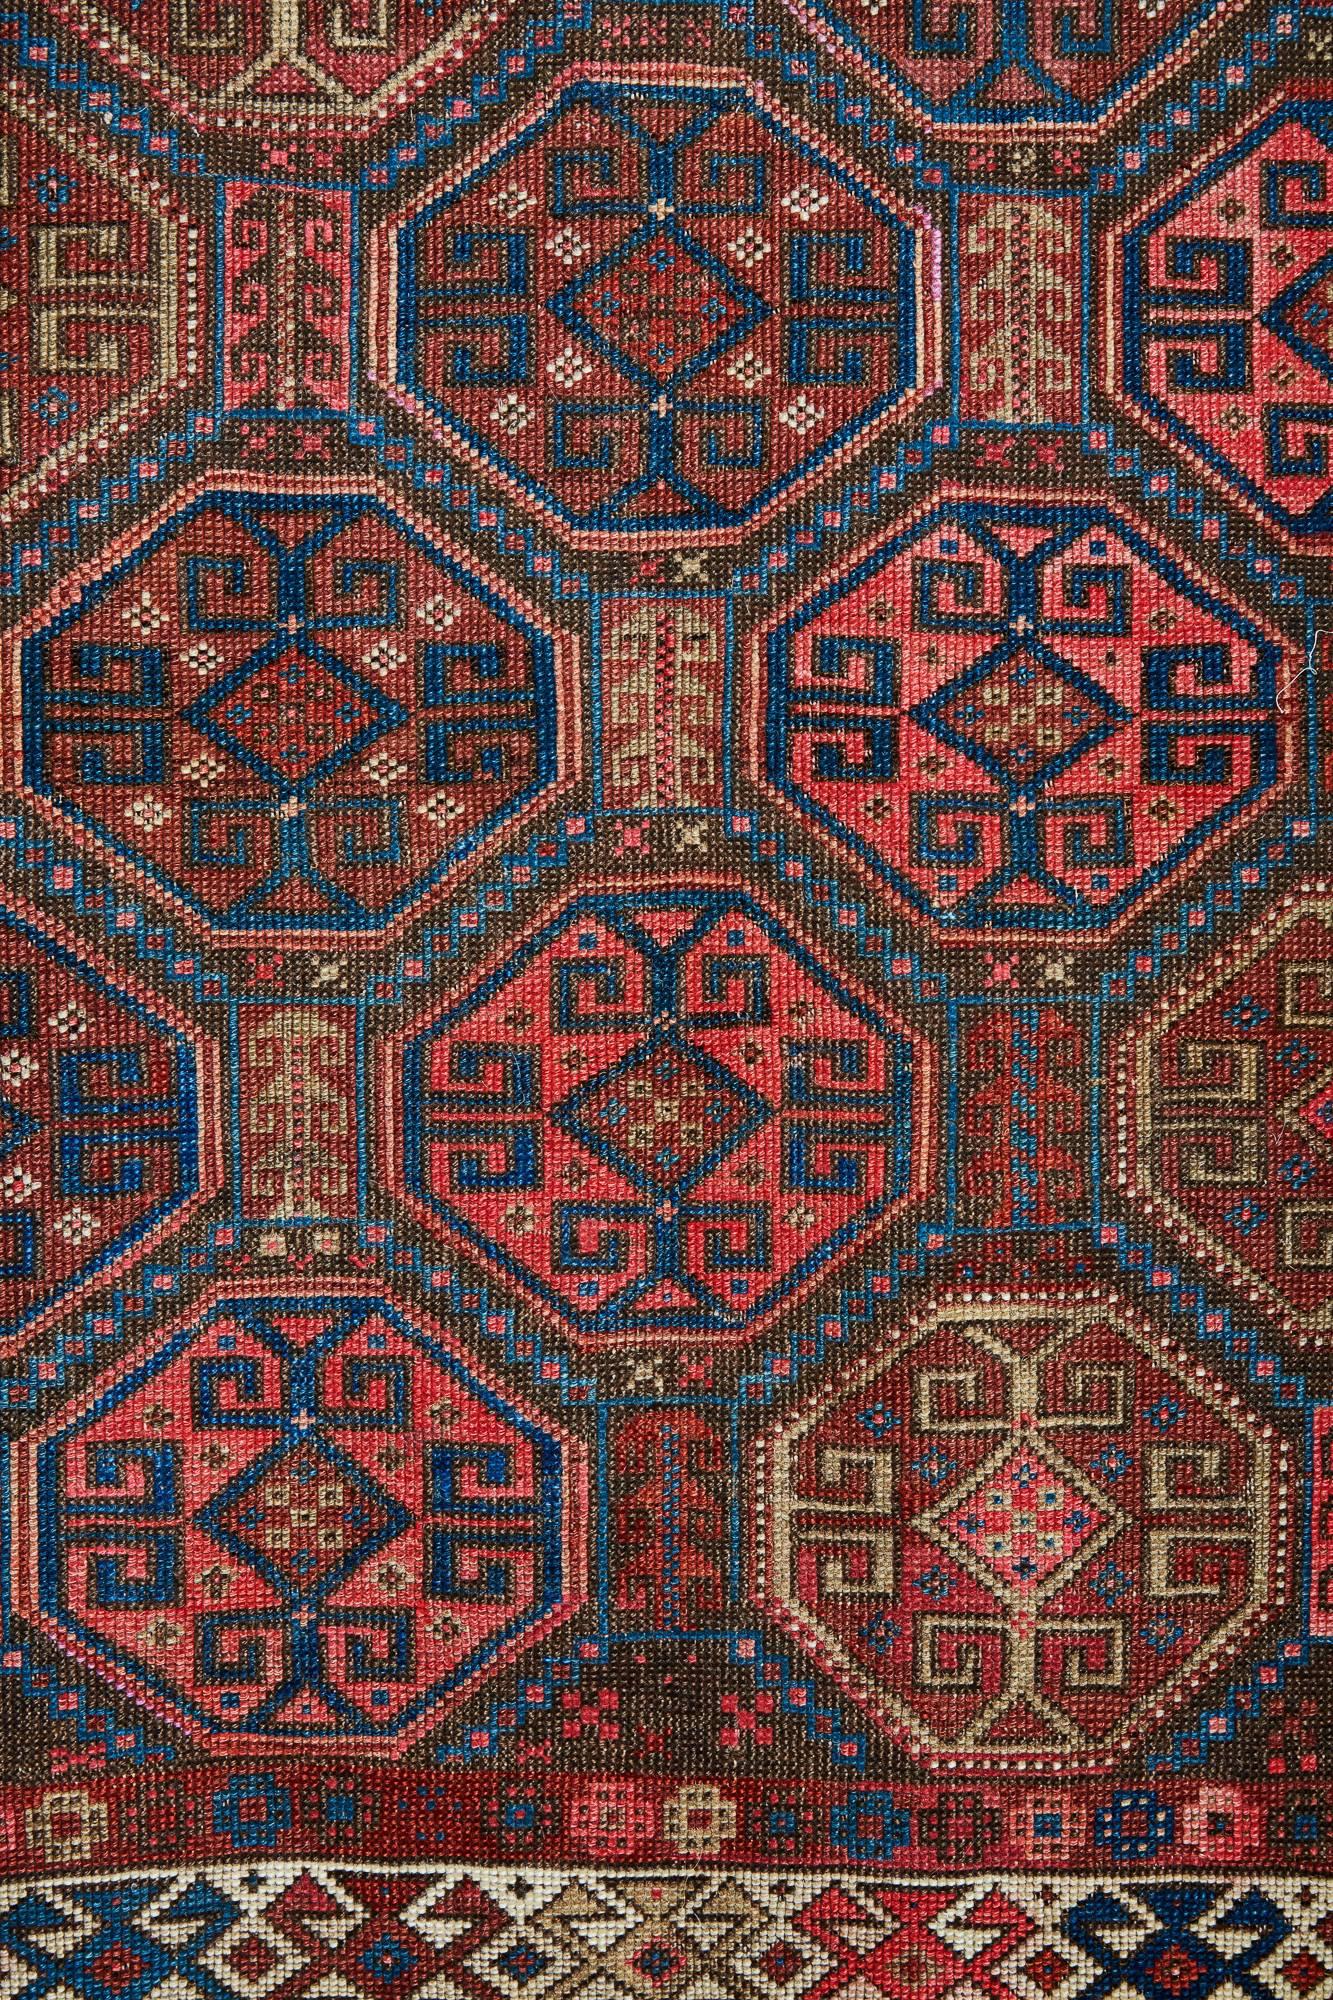 19th century Baluch rug from Afghanistan
Classic Baluch design.